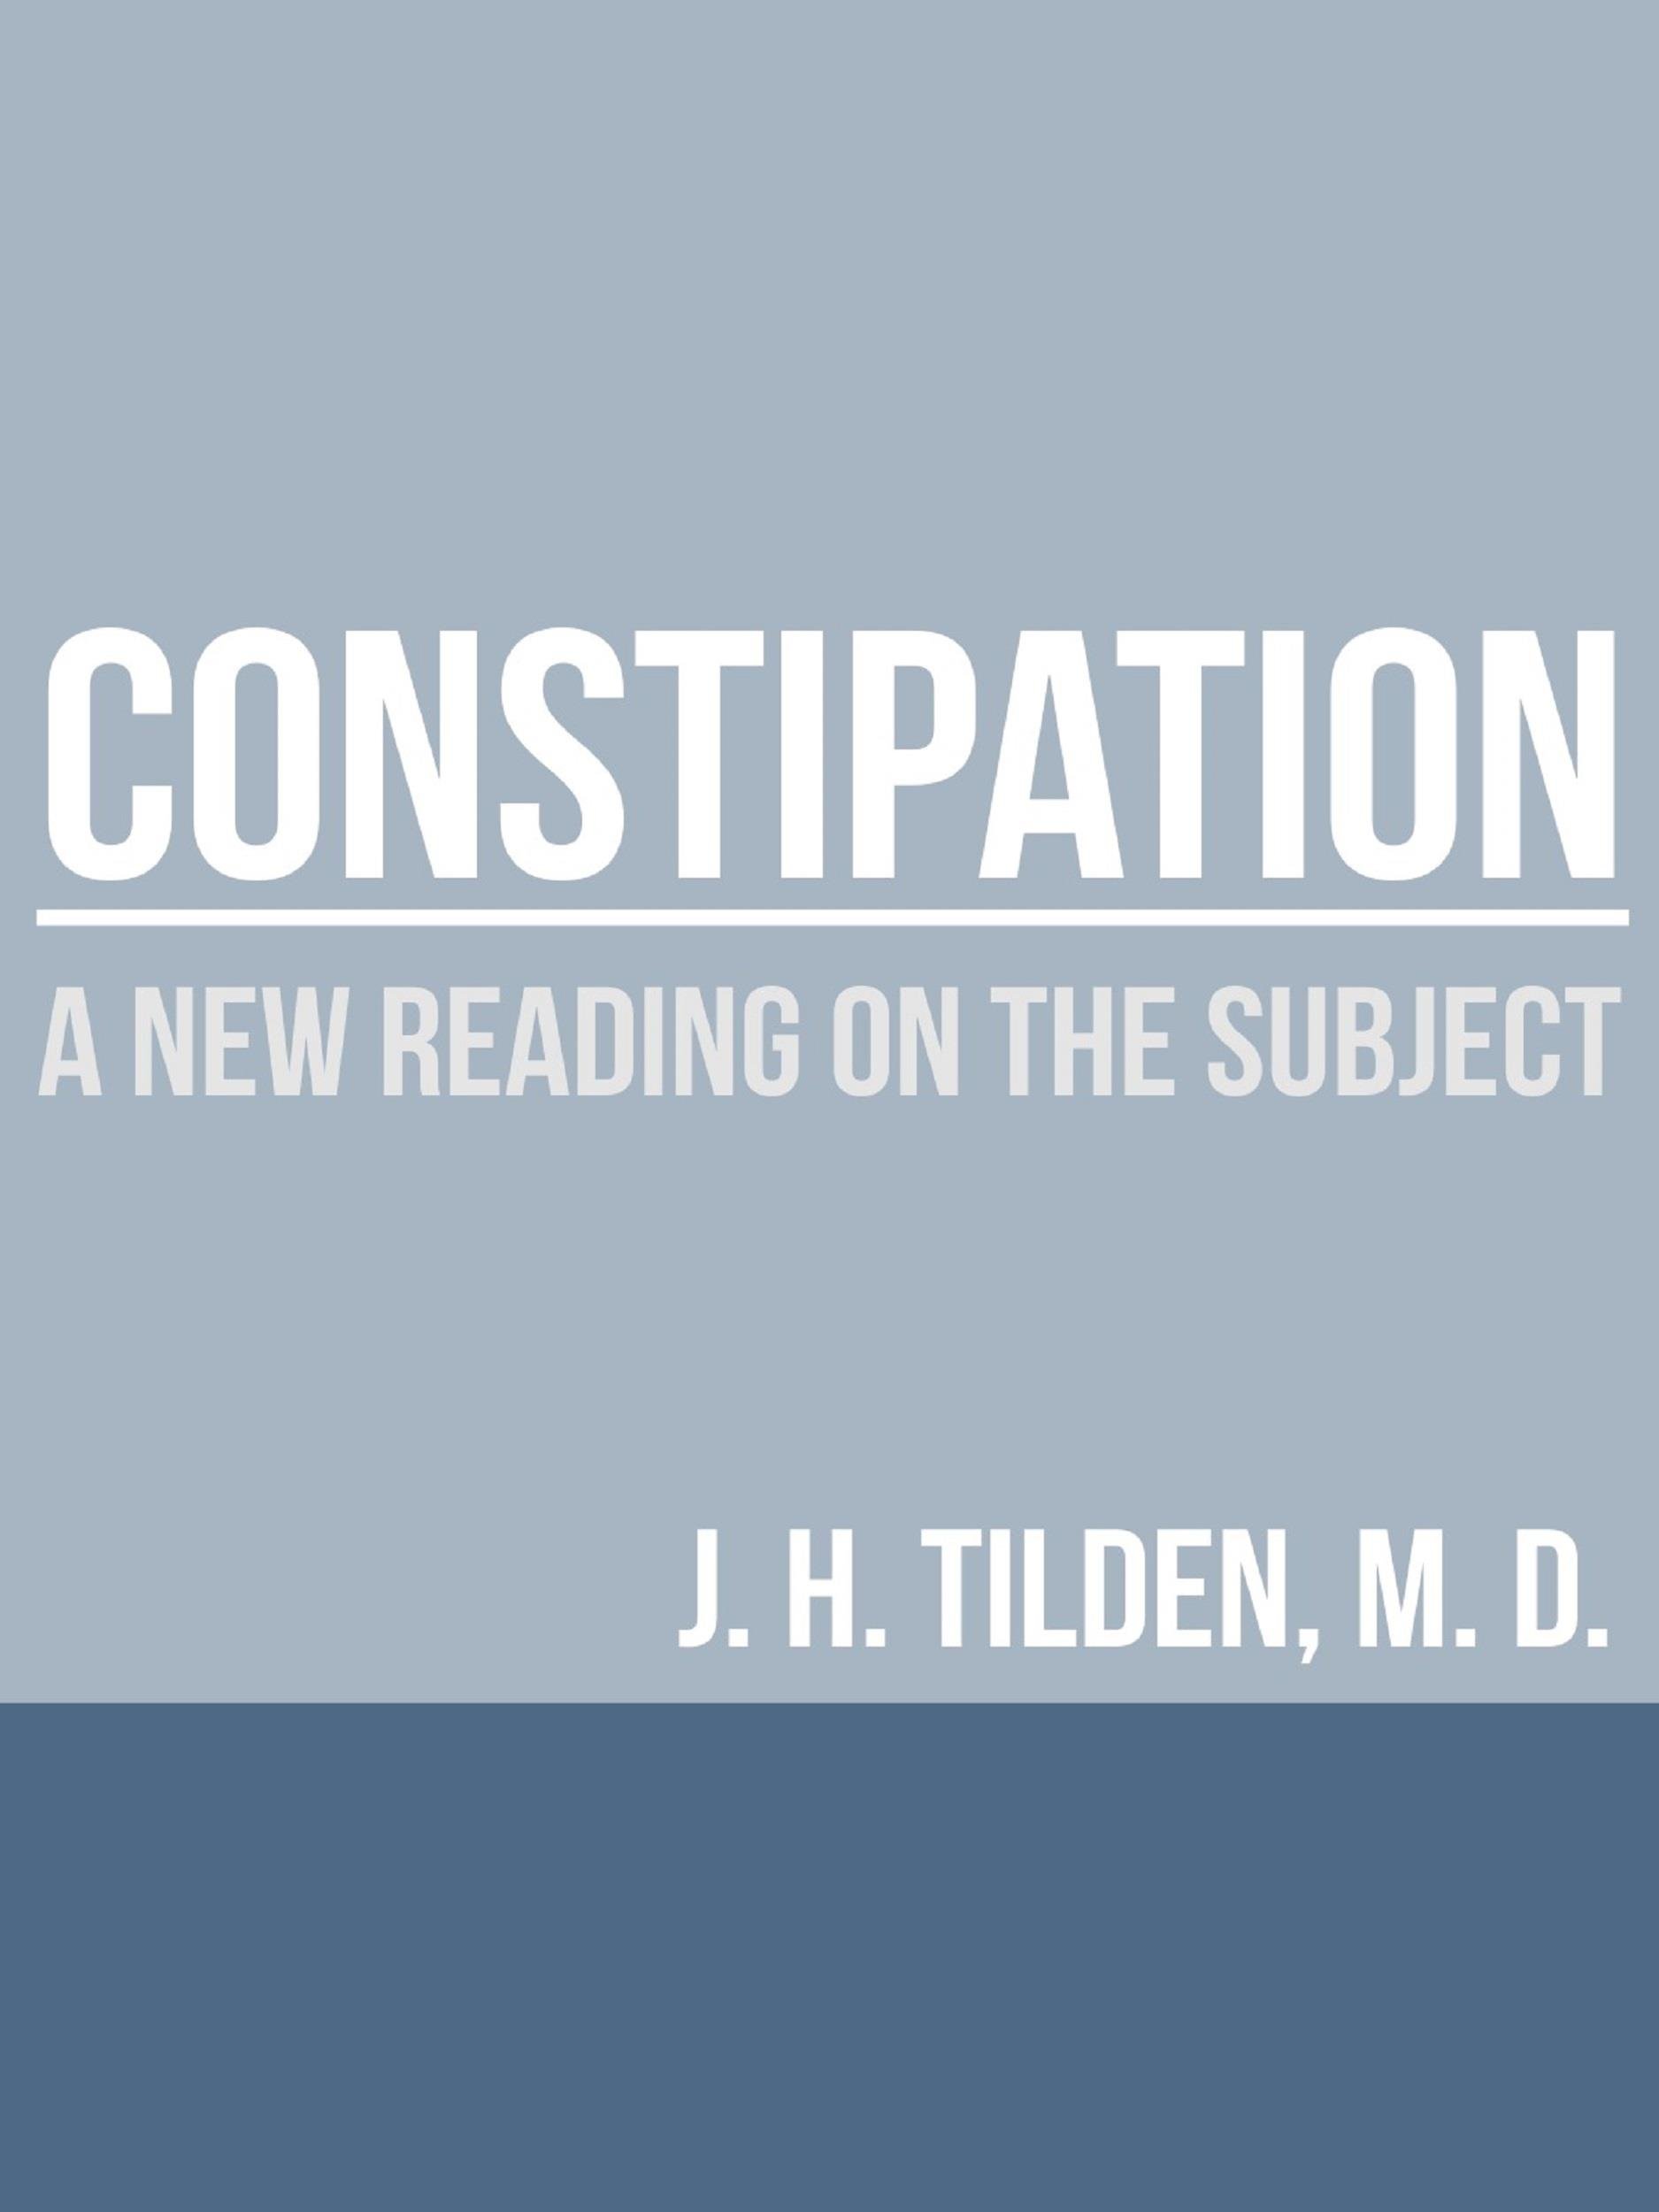 Constipation - A new reading on the Subject